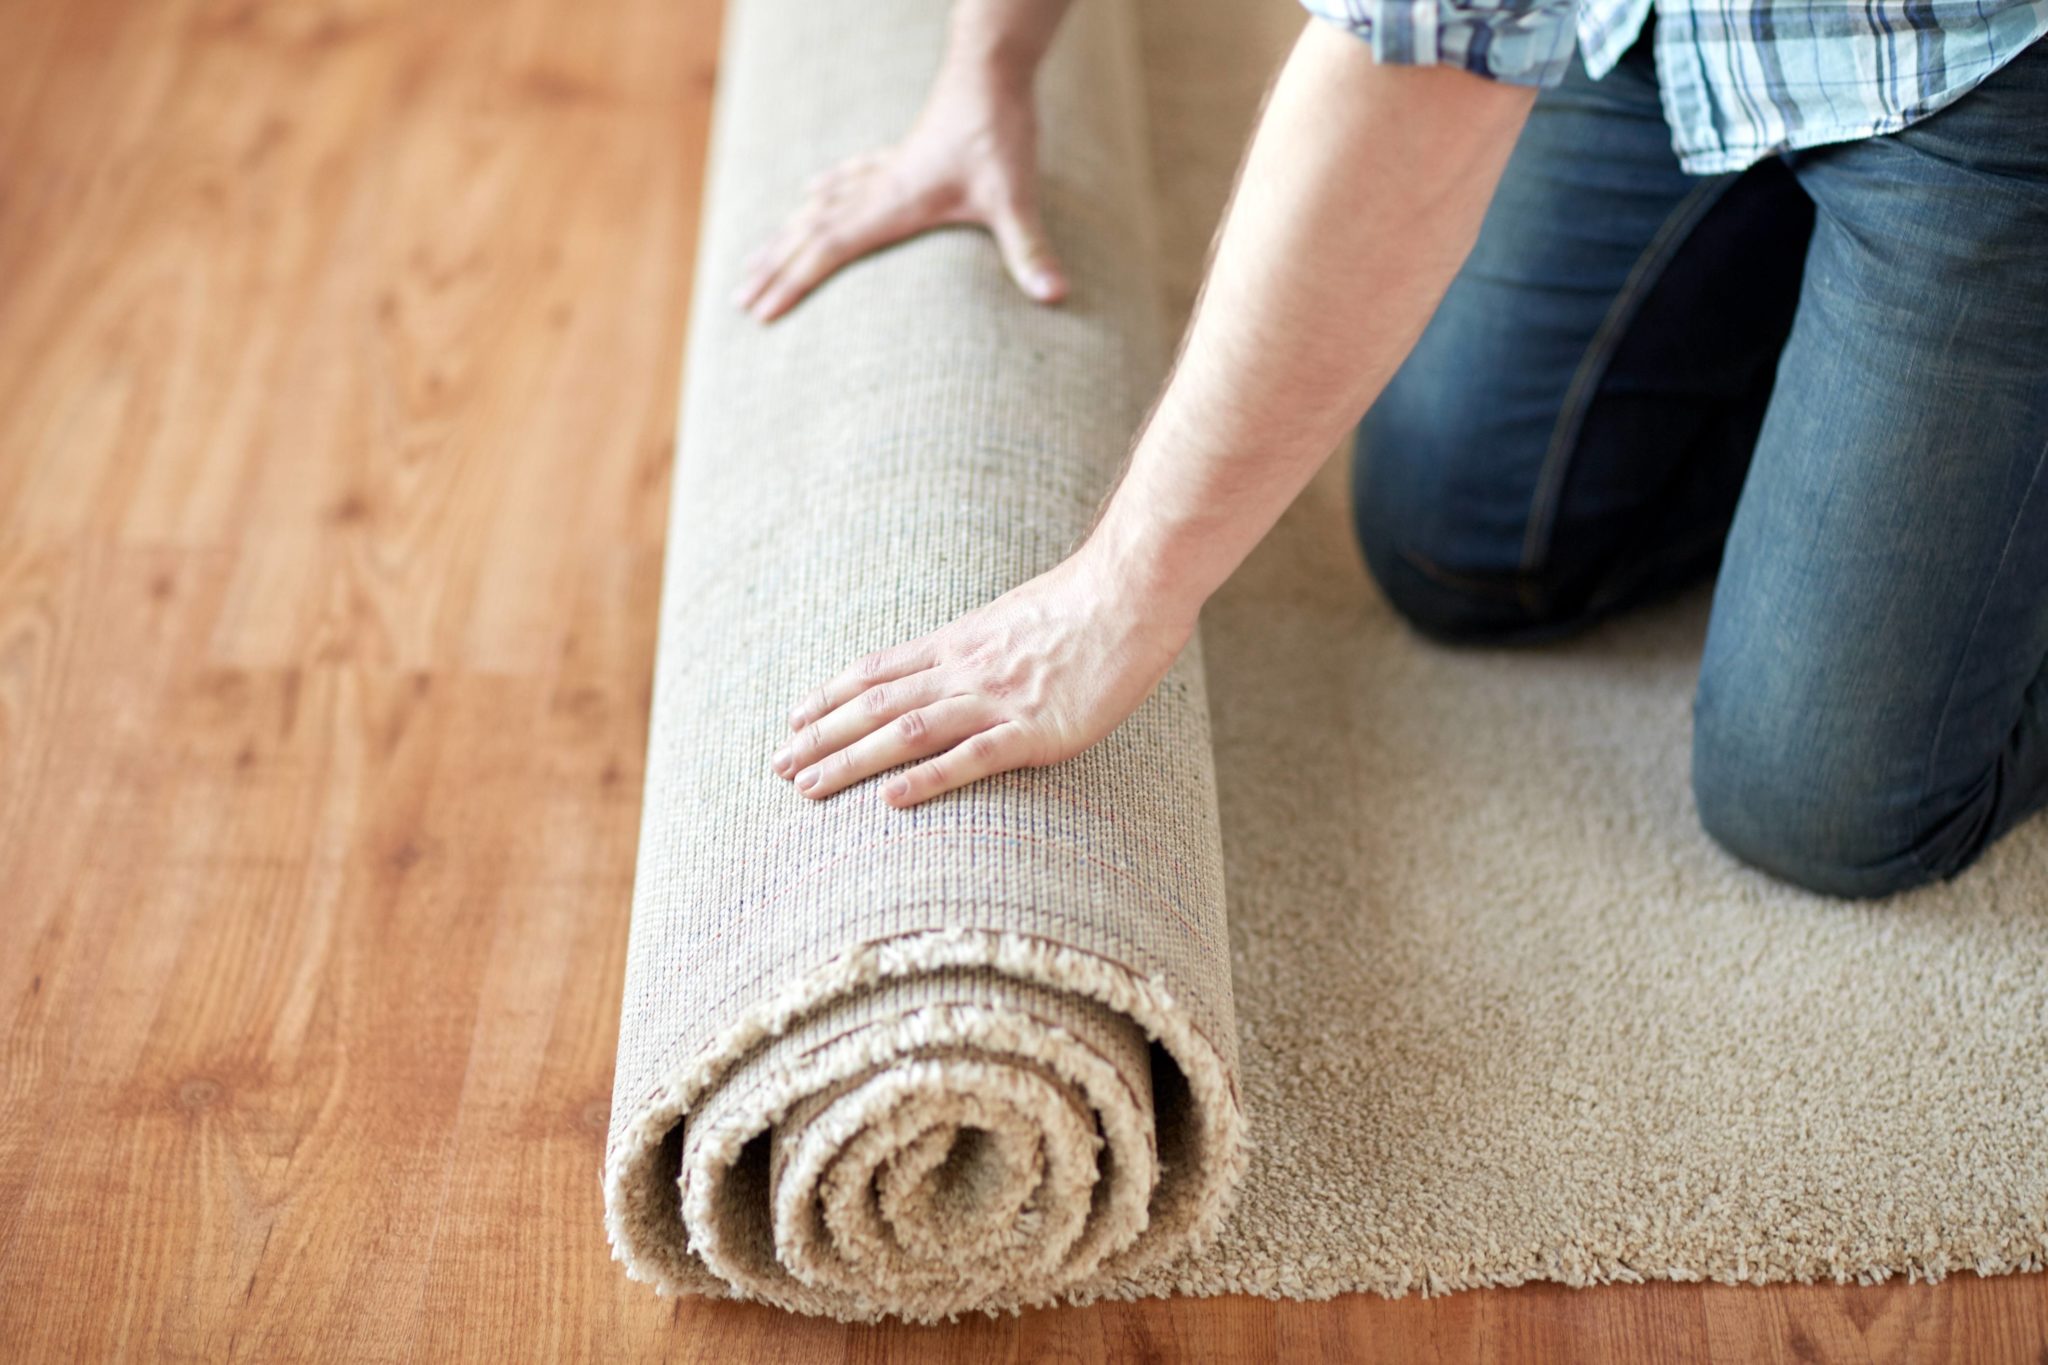 How to Fix Squeaking Floor Without Removing Carpet » The Money Pit